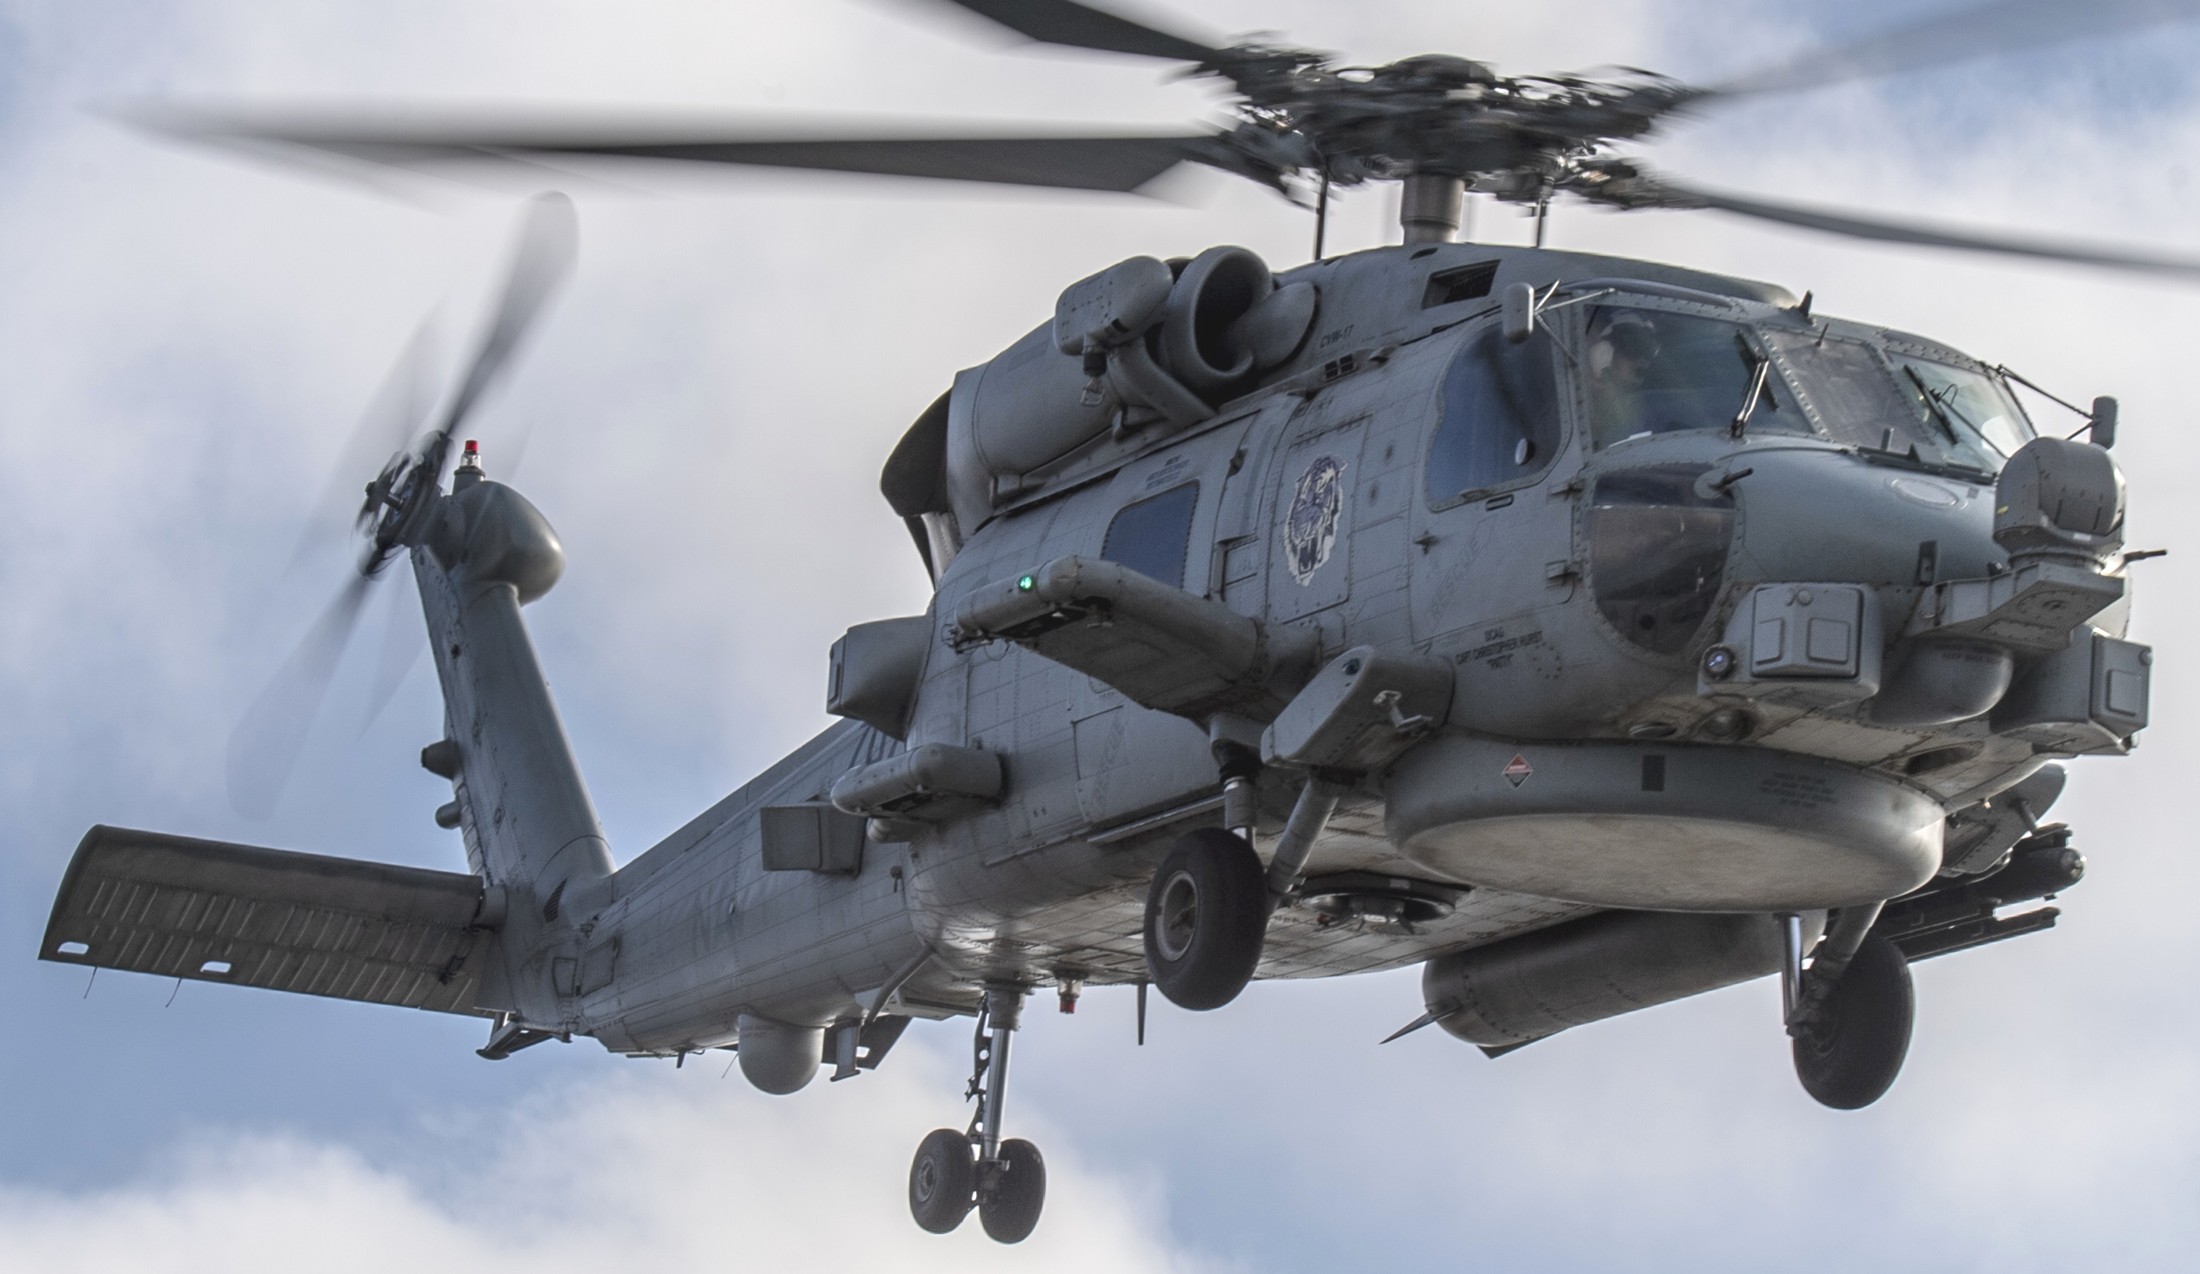 hsm-73 battlecats helicopter maritime strike squadron us navy mh-60r seahawk 2014 62